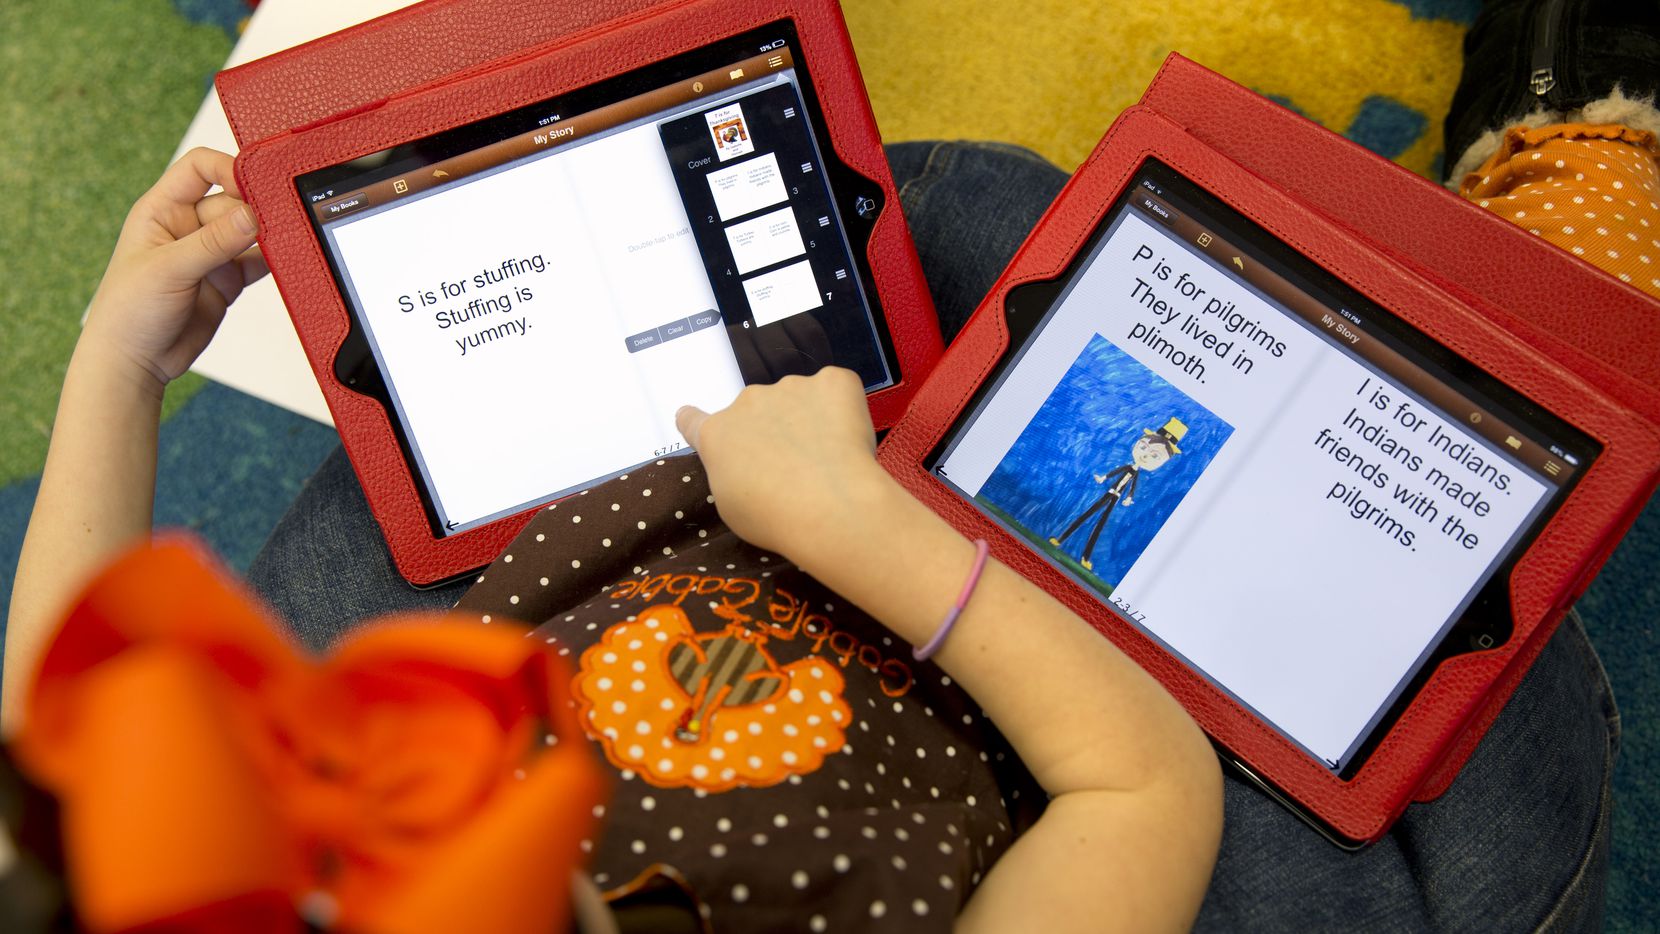 This photo taken Nov. 25, 2013 shows Isabelle Fontana, 7, working on two iPads for an e-book...